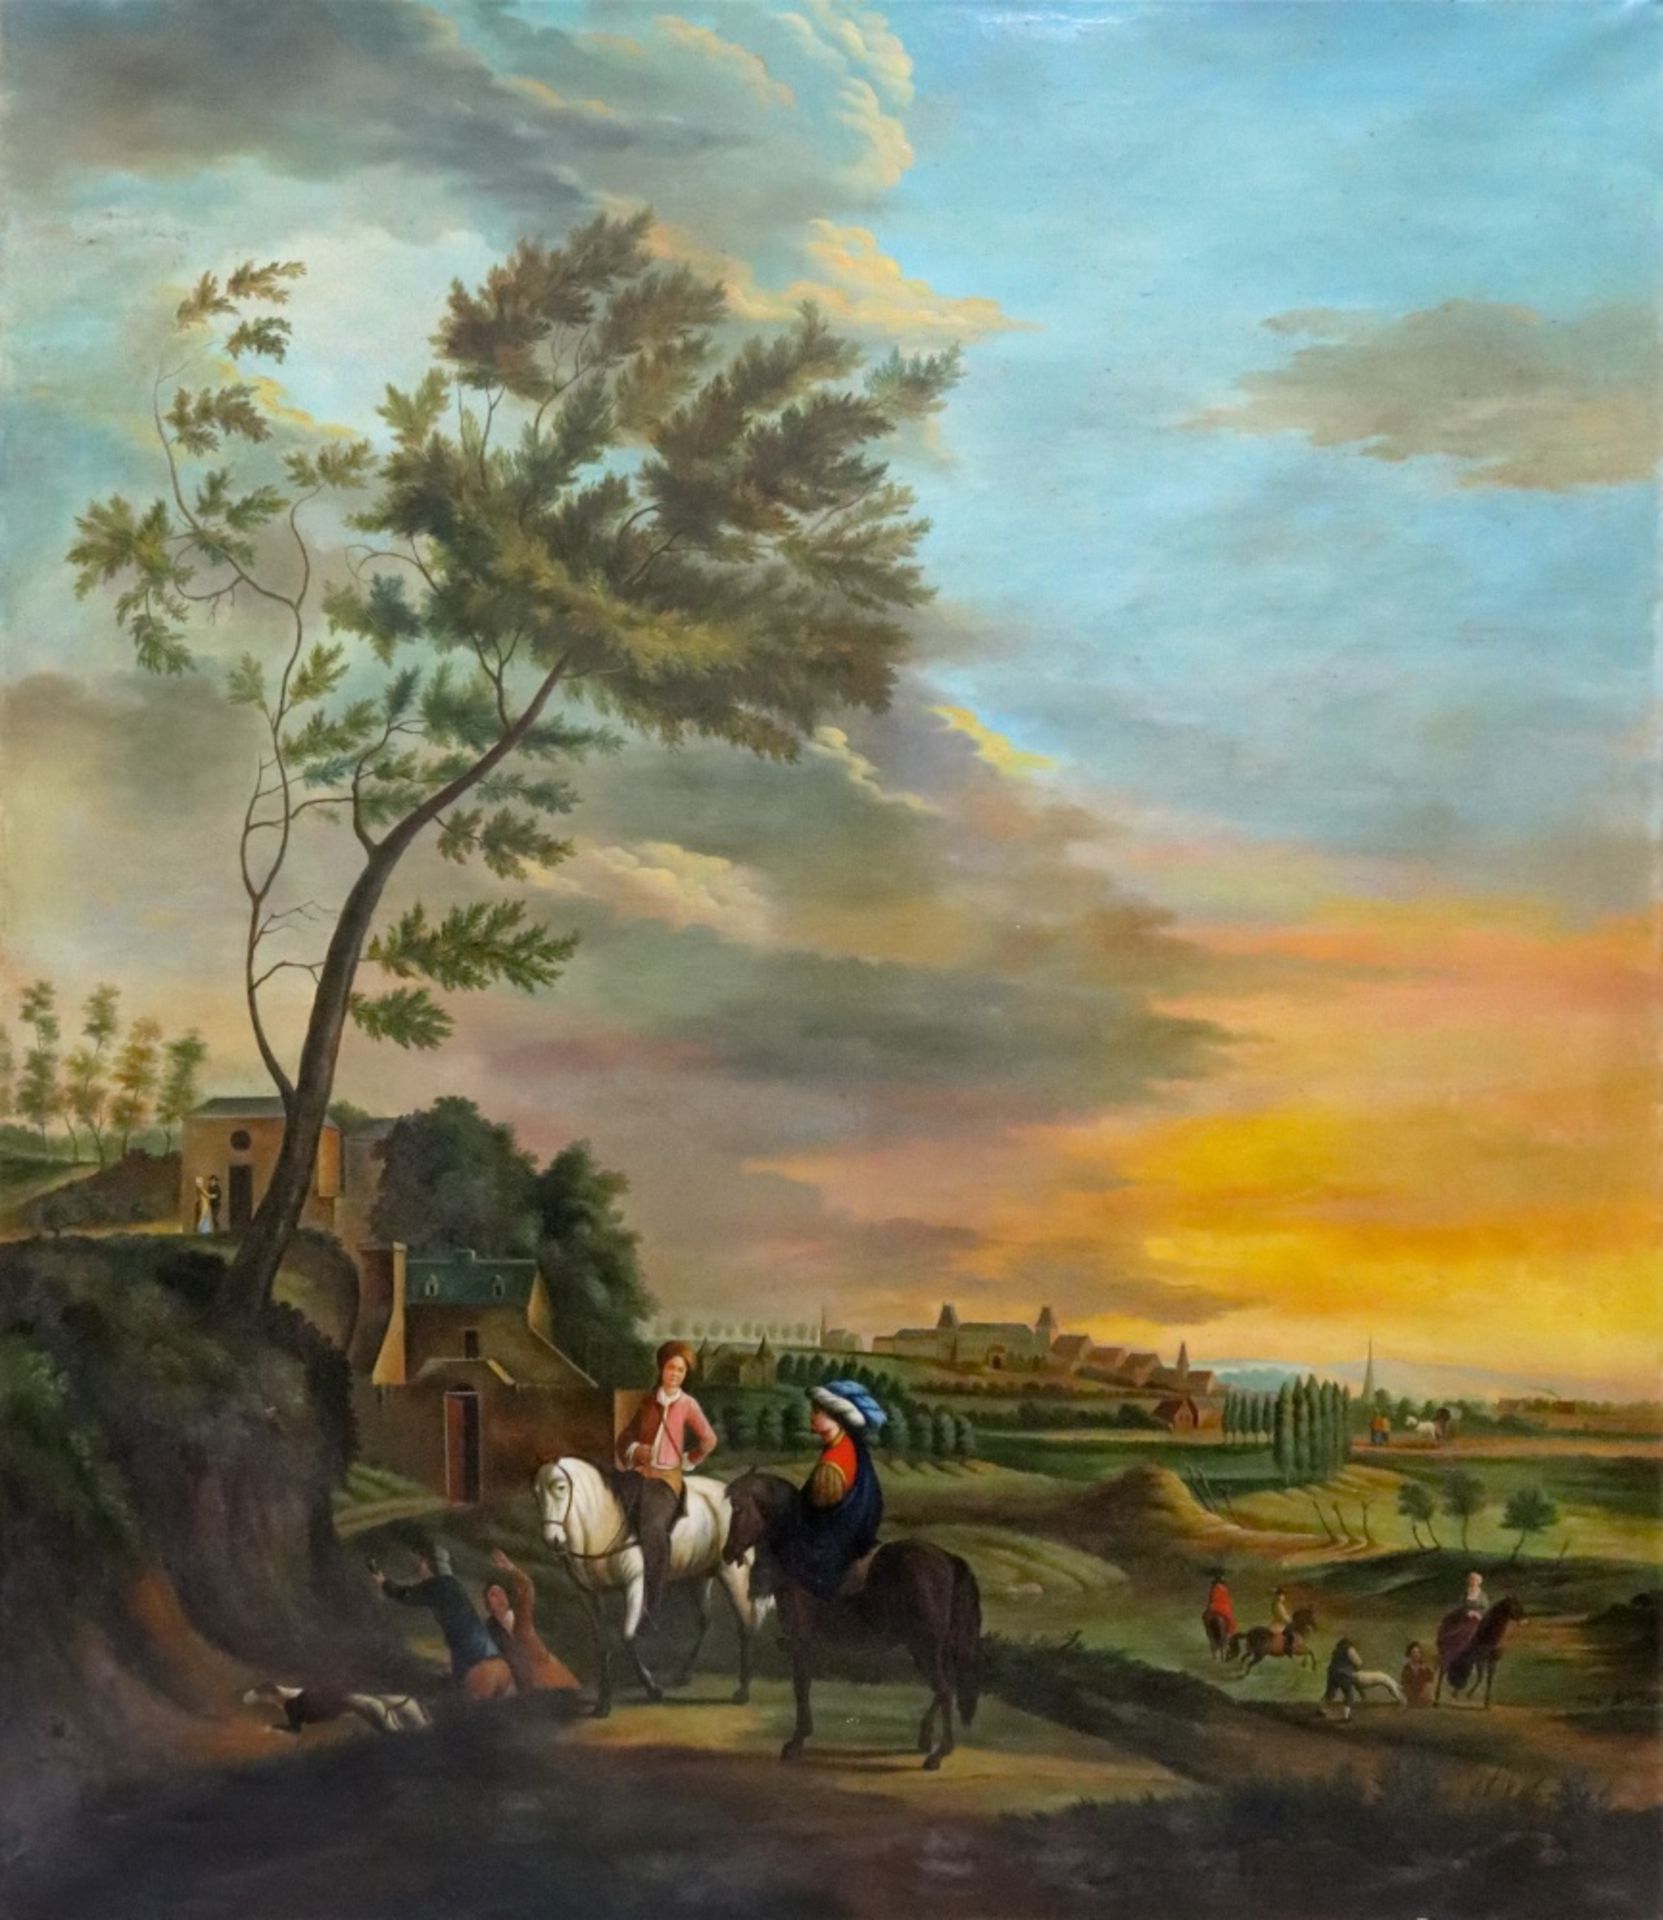 European School, 19th Century, Figures on horses in an extensive landscape, with a village beyond,